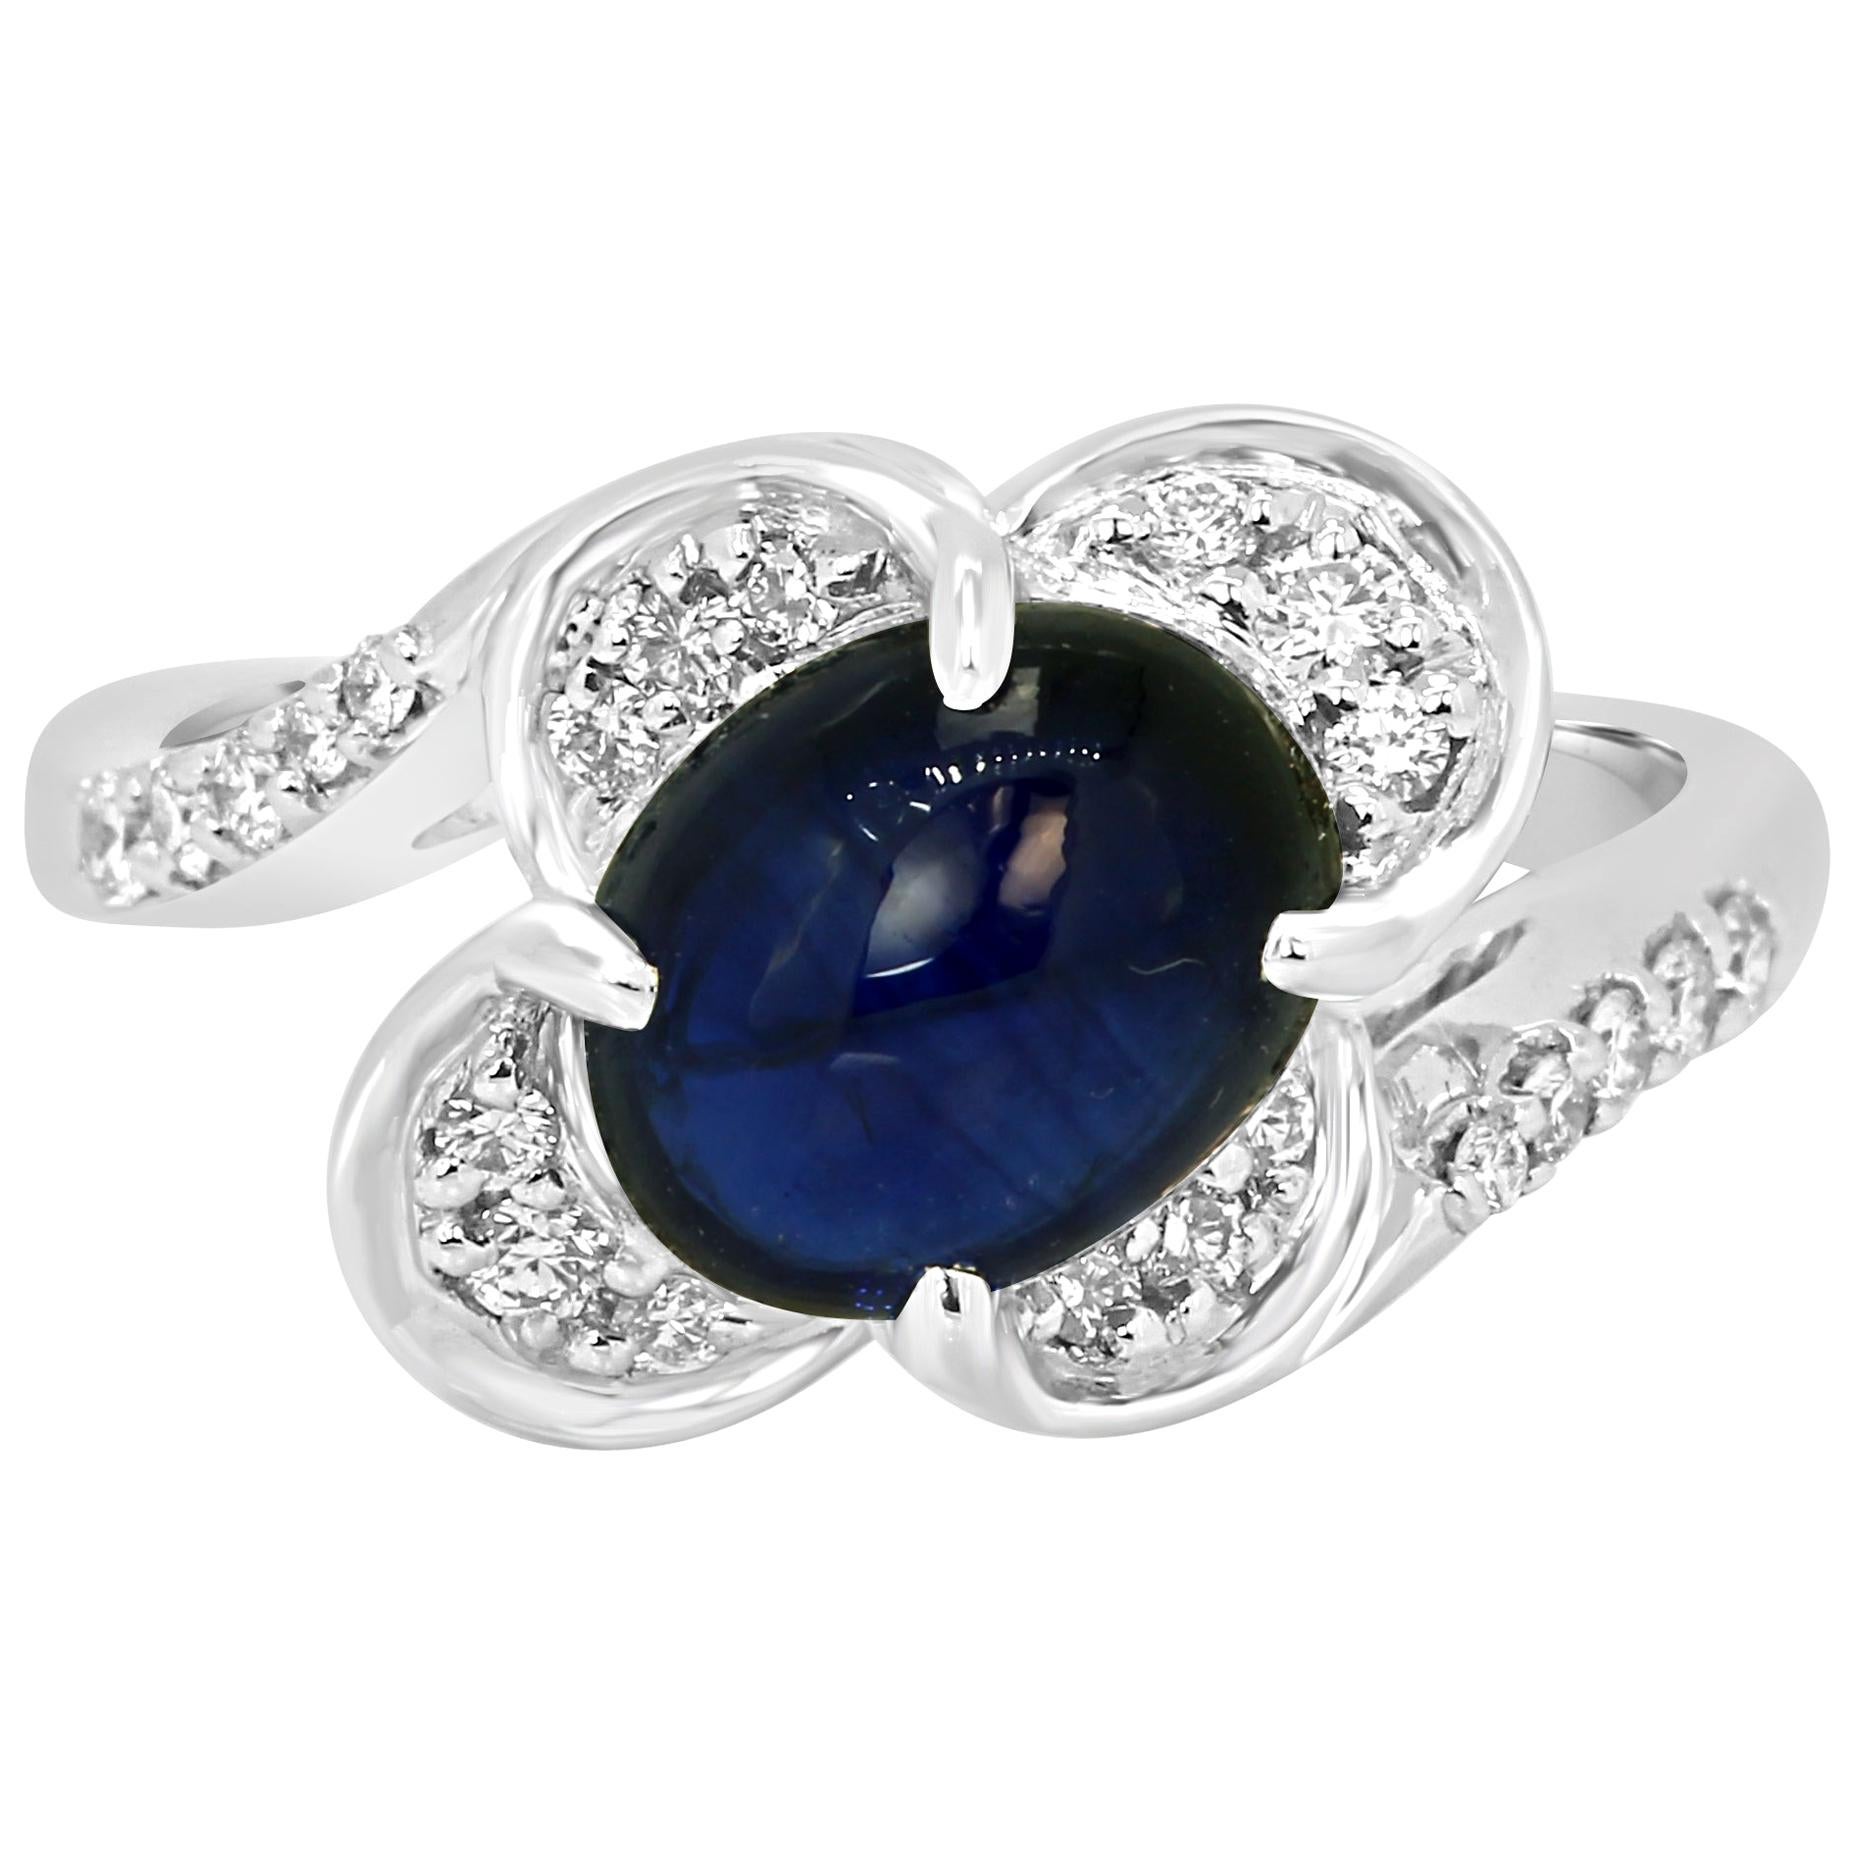 GIA Certified 3.04 Carat Blue Sapphire Cabochon Diamond Halo Gold Cocktail Ring